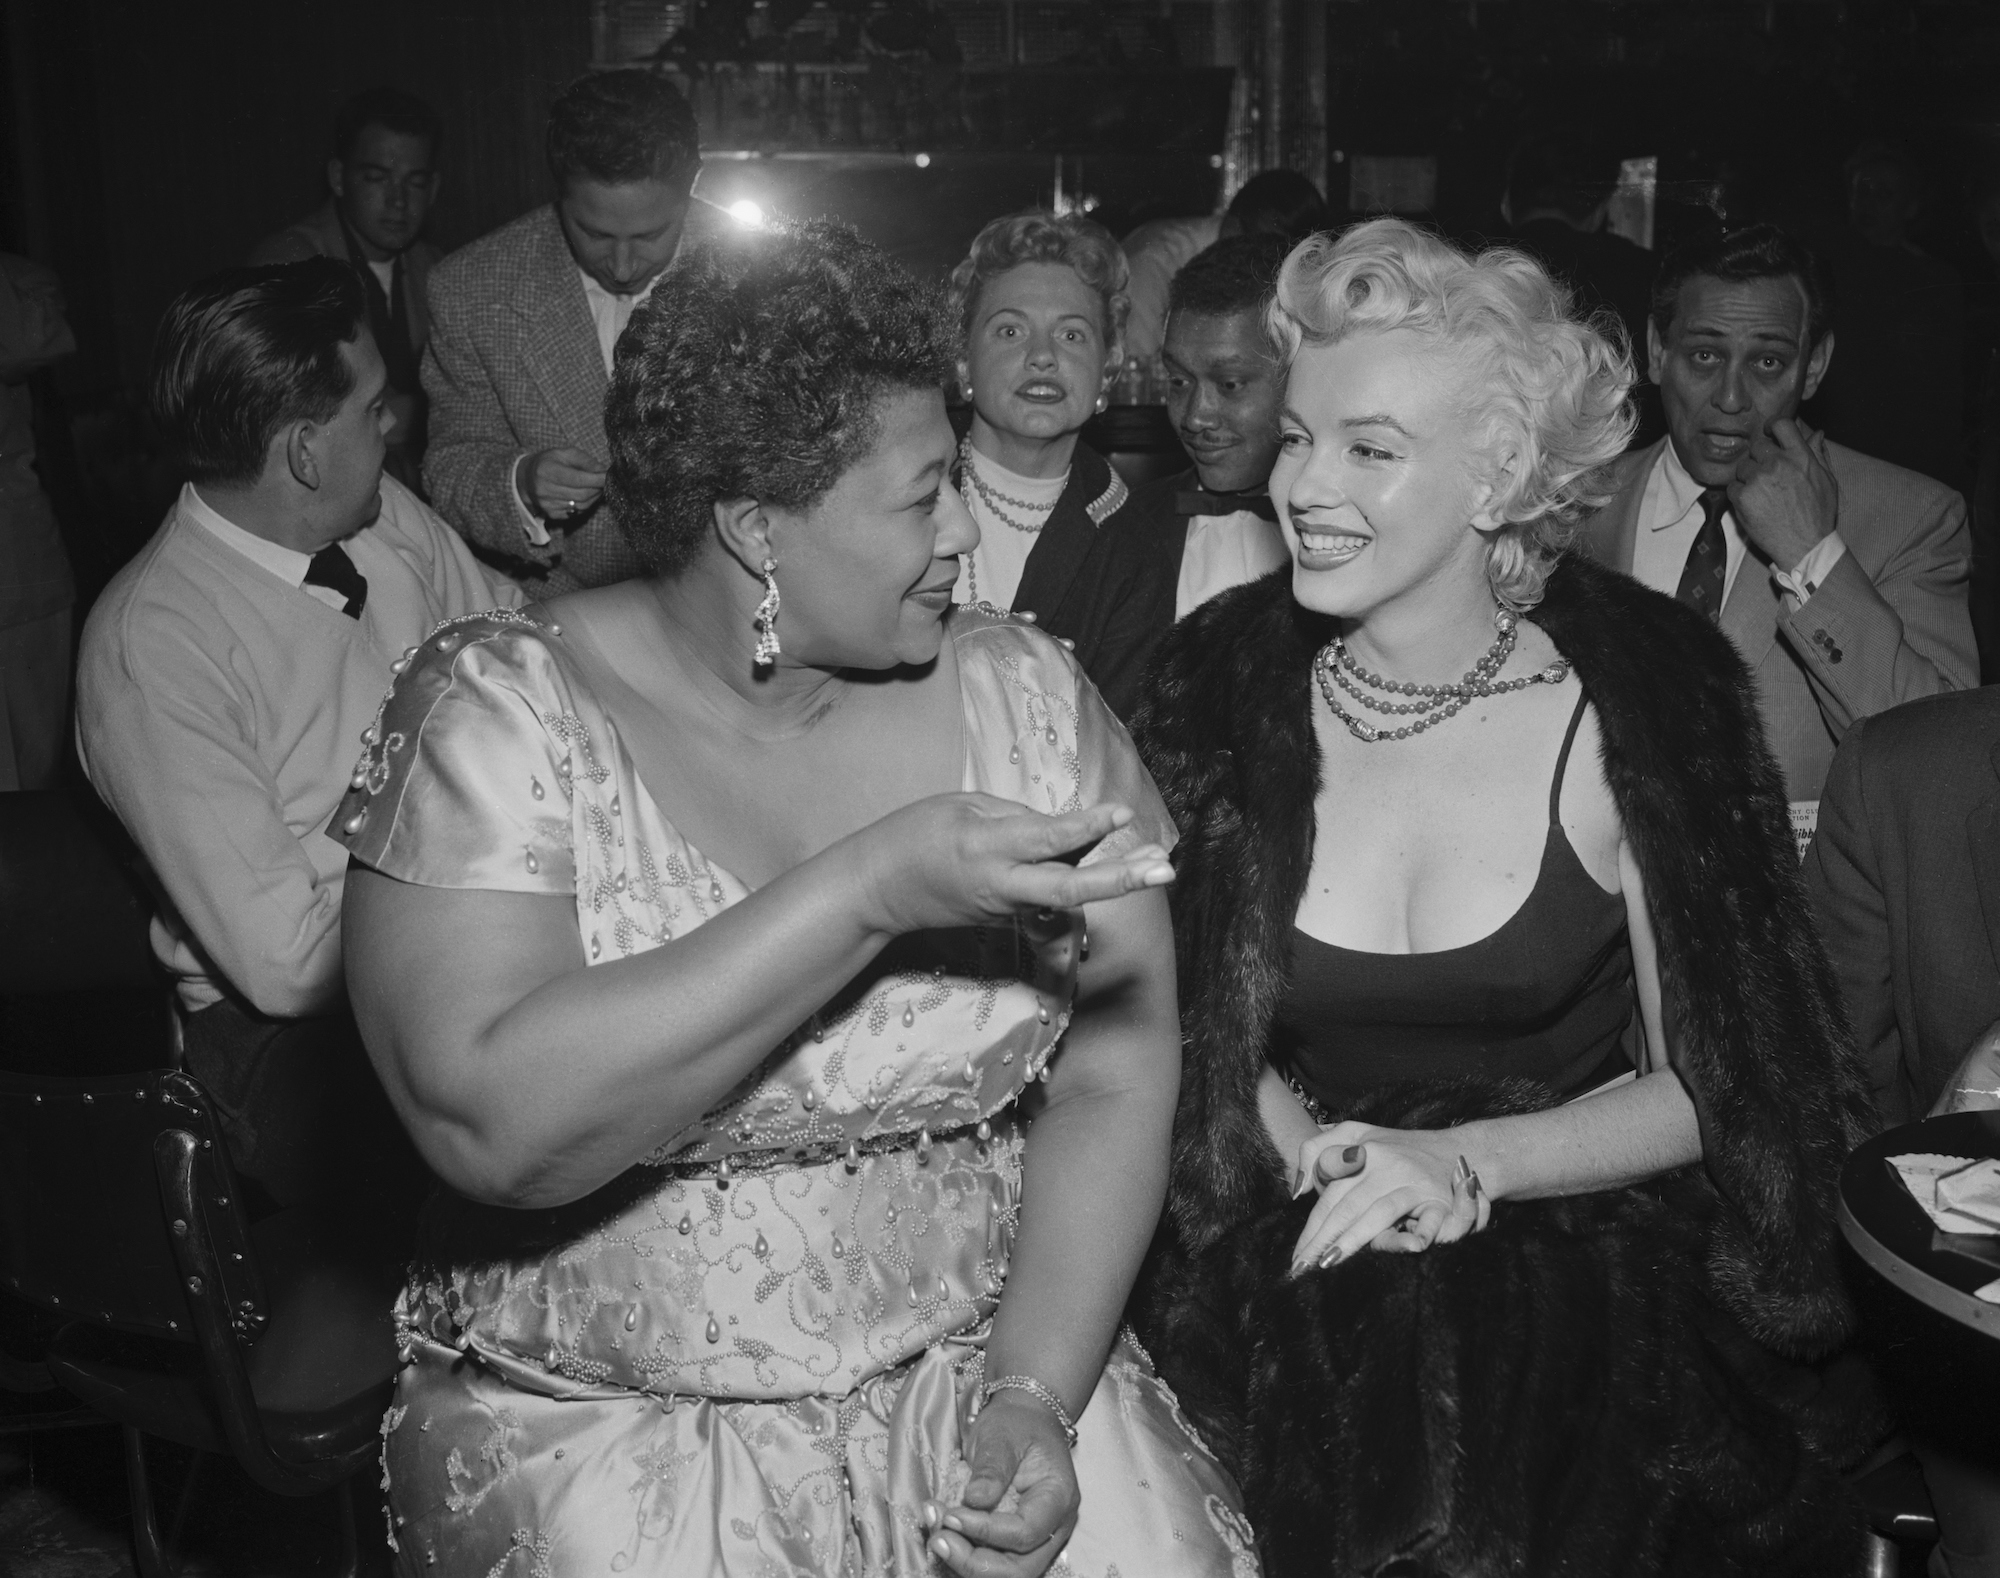 (L-R) Ella Fitzgerald and Marilyn Monroe turned to each other, laughing